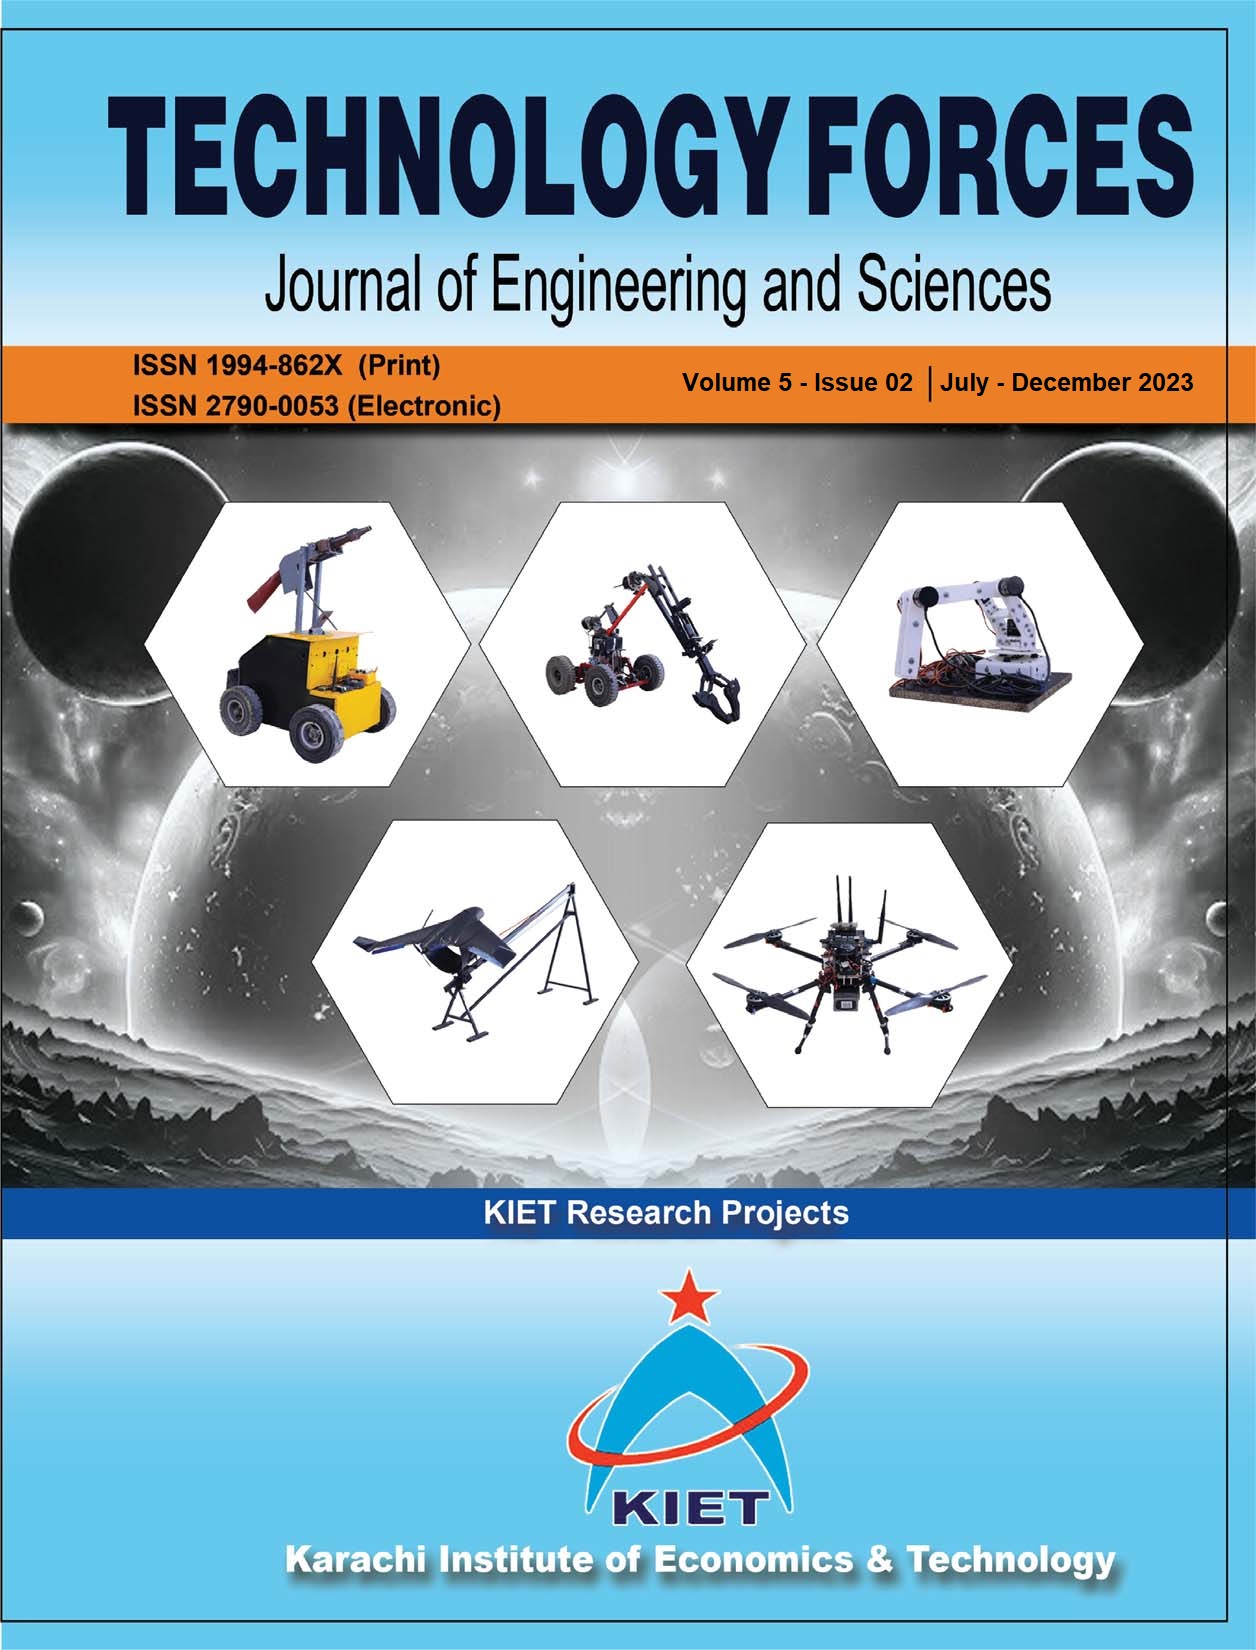 					View Vol. 5 No. 2 (2023): Technology Forces Journal of Engineering and Sciences
				